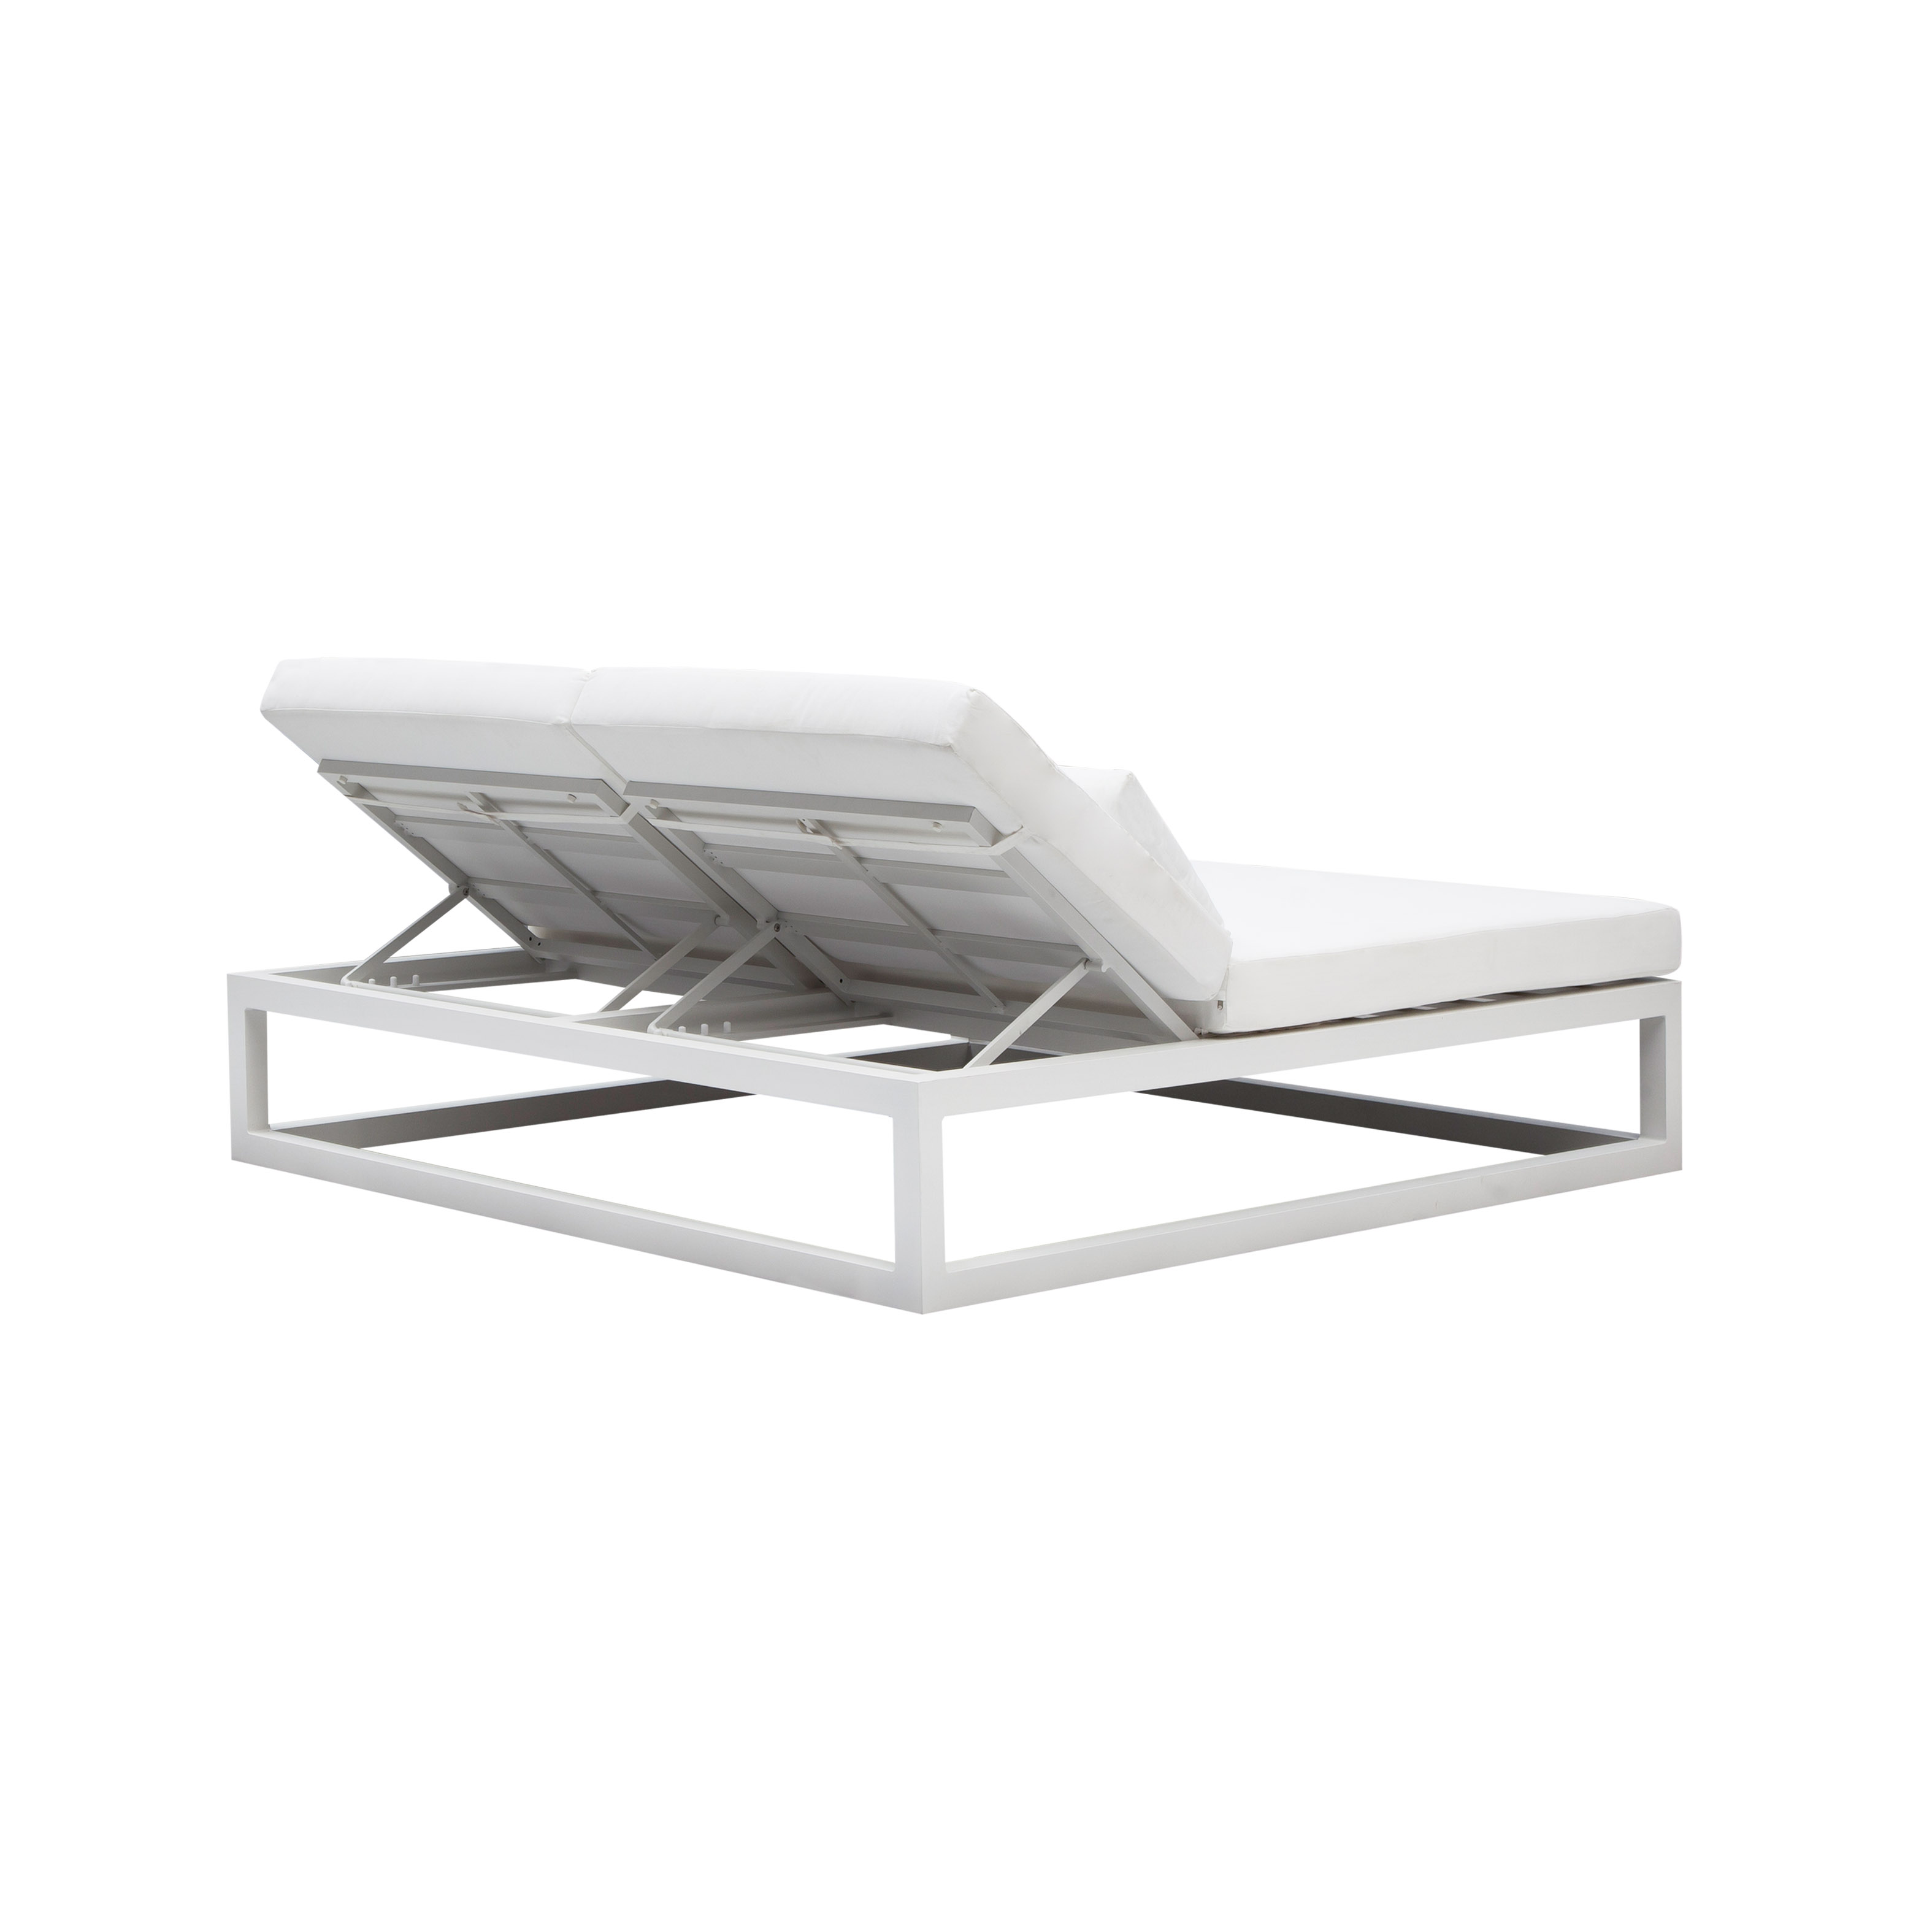 Reen alu.duebel daybed S5